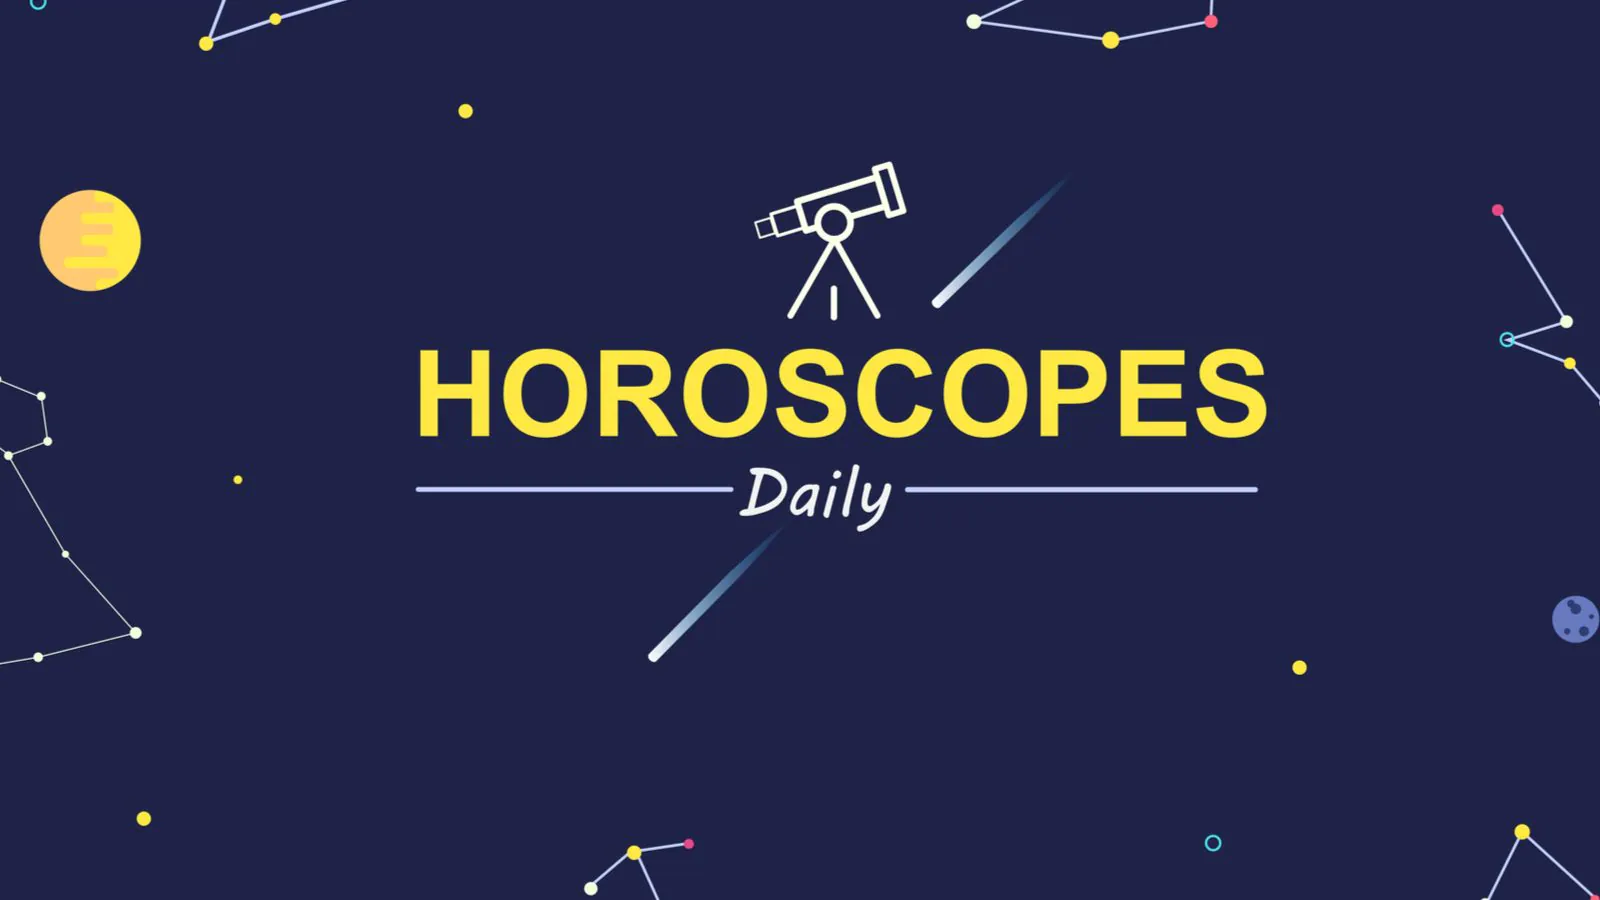 Check Out Daily Astrological Prediction for Aries, Taurus, Libra, Sagittarius And Other Zodiac Signs for Tuesday